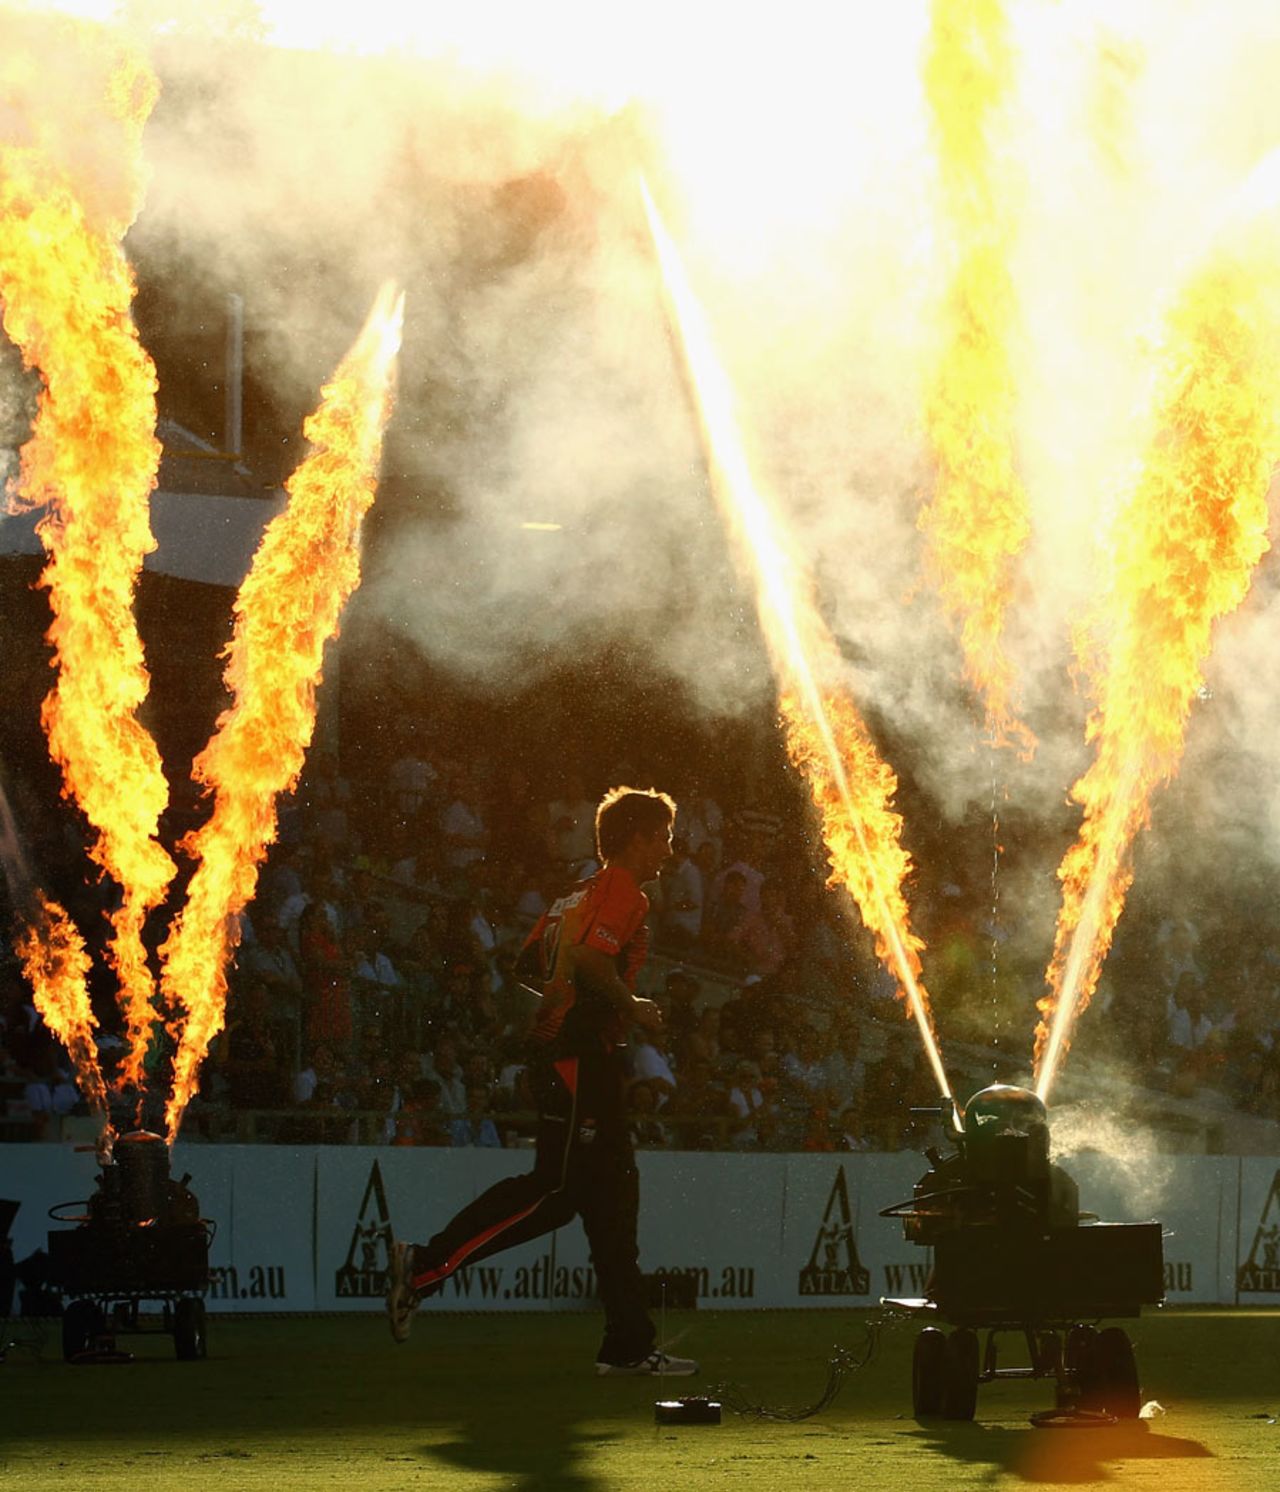 Mitchell Marsh runs out at the start of the second innings, Perth Scorchers v Melbourne Stars, BBL, 1st semi-final, Perth, January 21, 2012